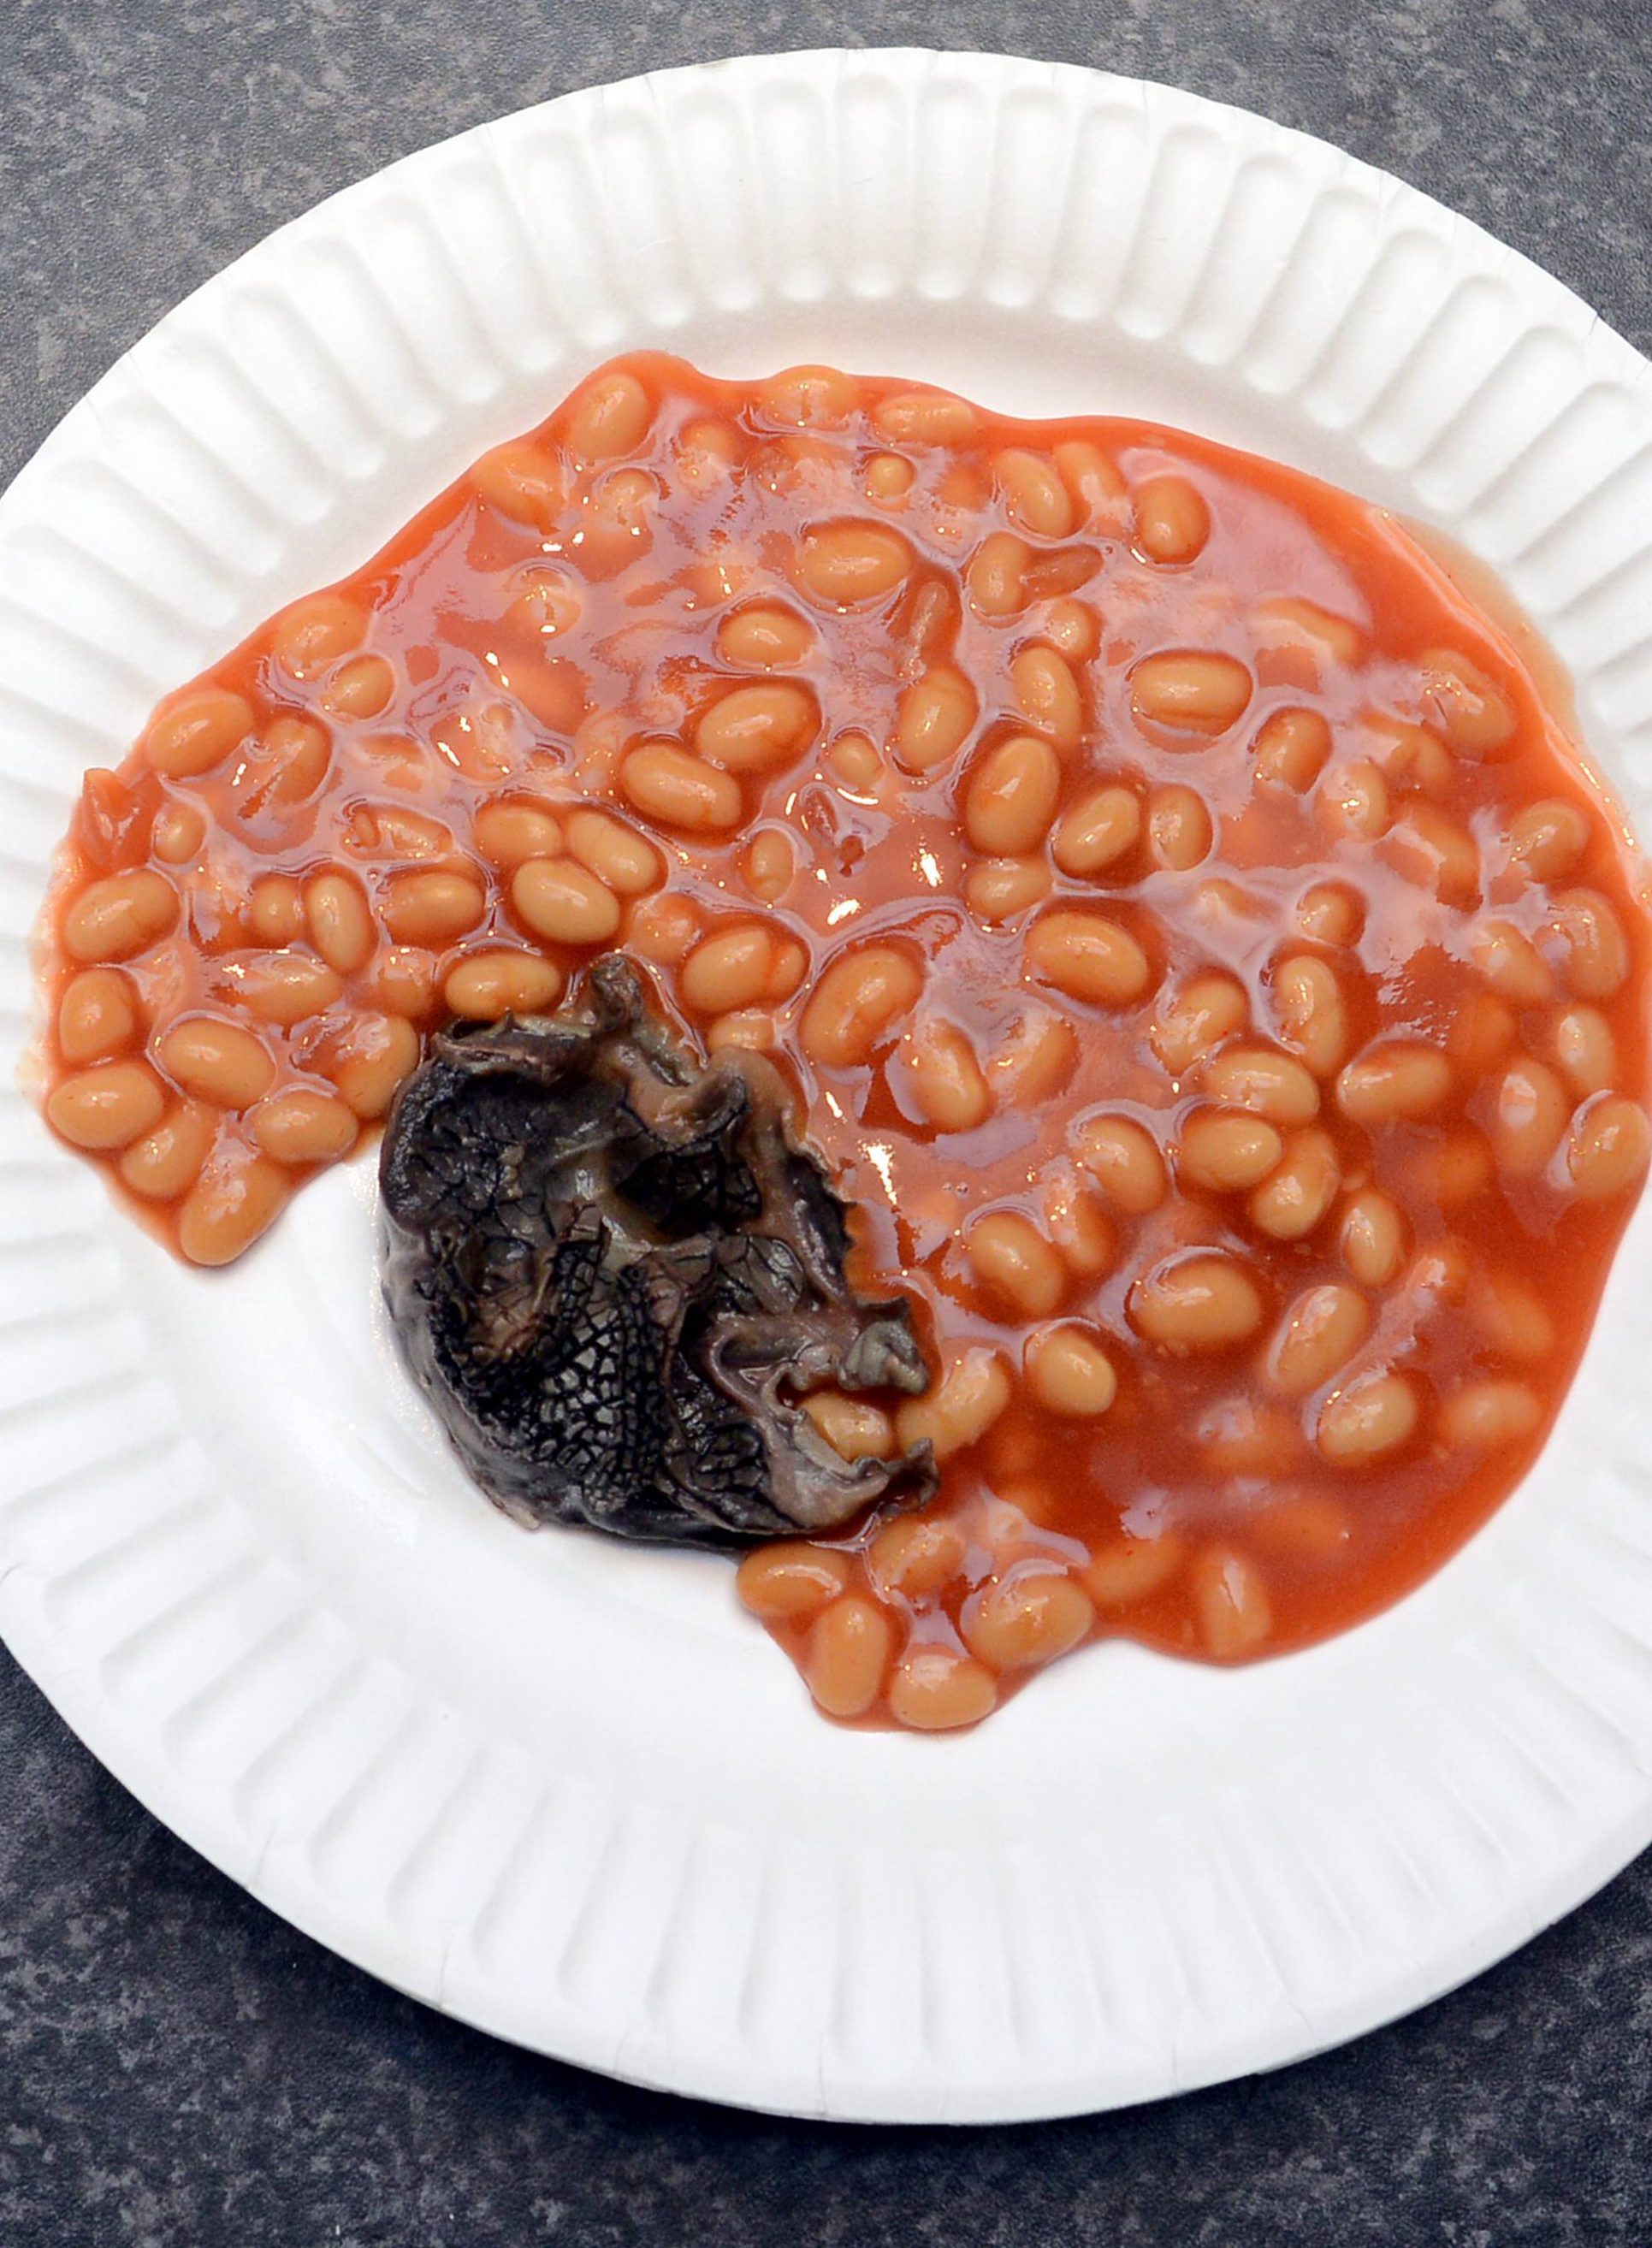 Mum who found scaly mystery creature in tin of Branston Baked Beans ...